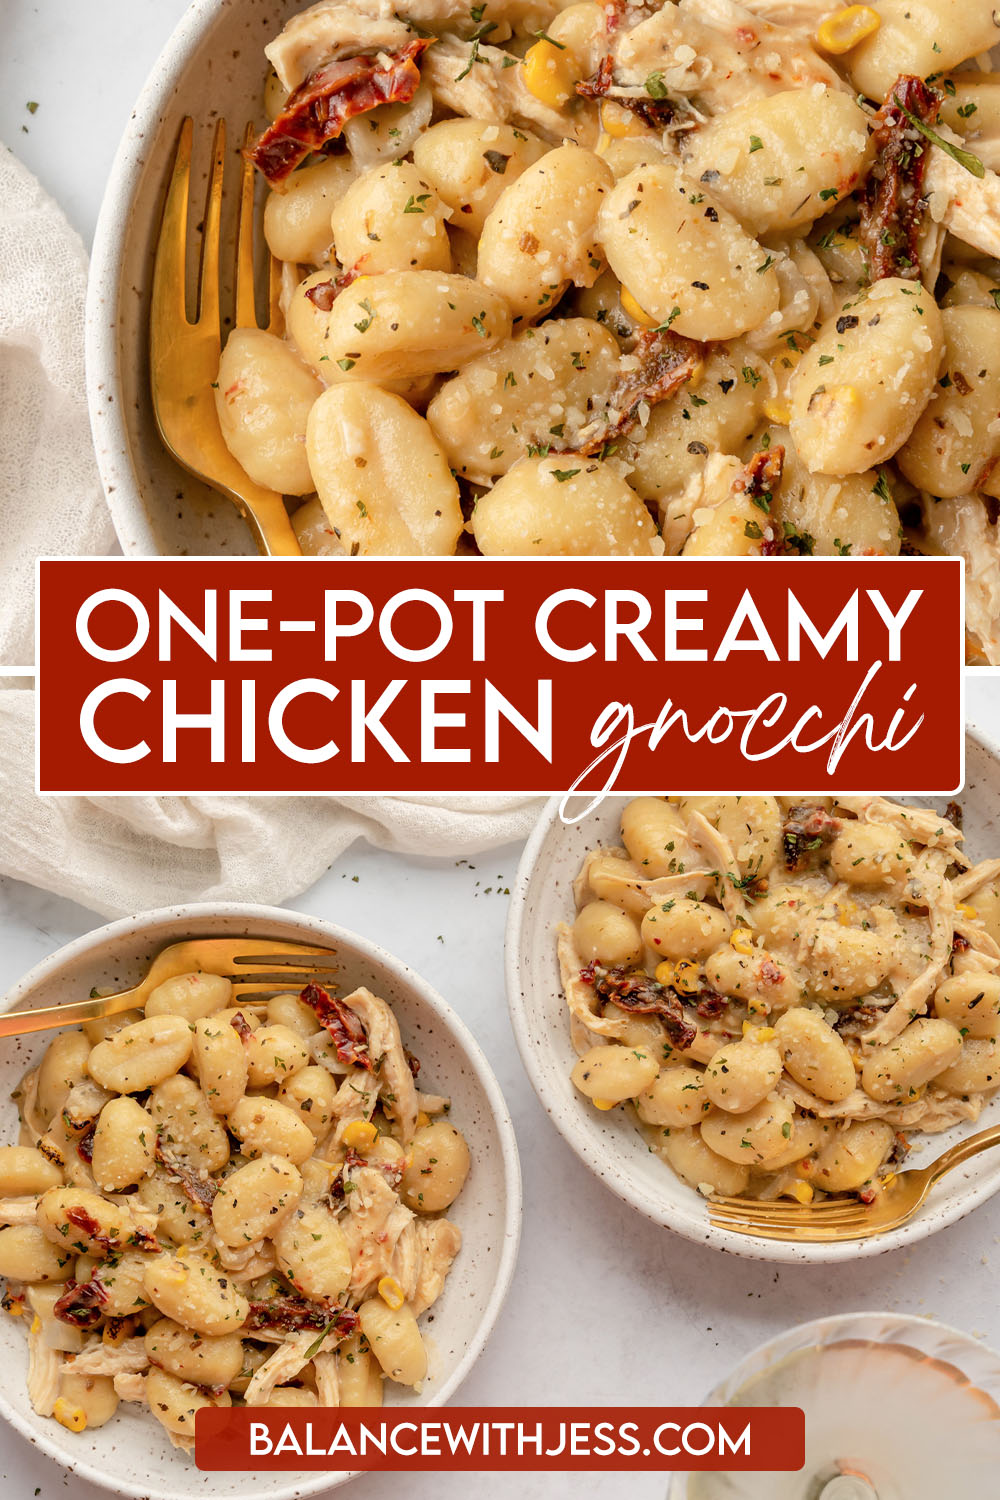 This easy and healthy One-Pot Creamy Chicken Gnocchi is absolutely cozy, saucy, and flavorful. Made with chicken, sun dried tomatoes, corn, and Parmesan cheese for lots of flavor. The perfect weeknight dinner or date night meal.